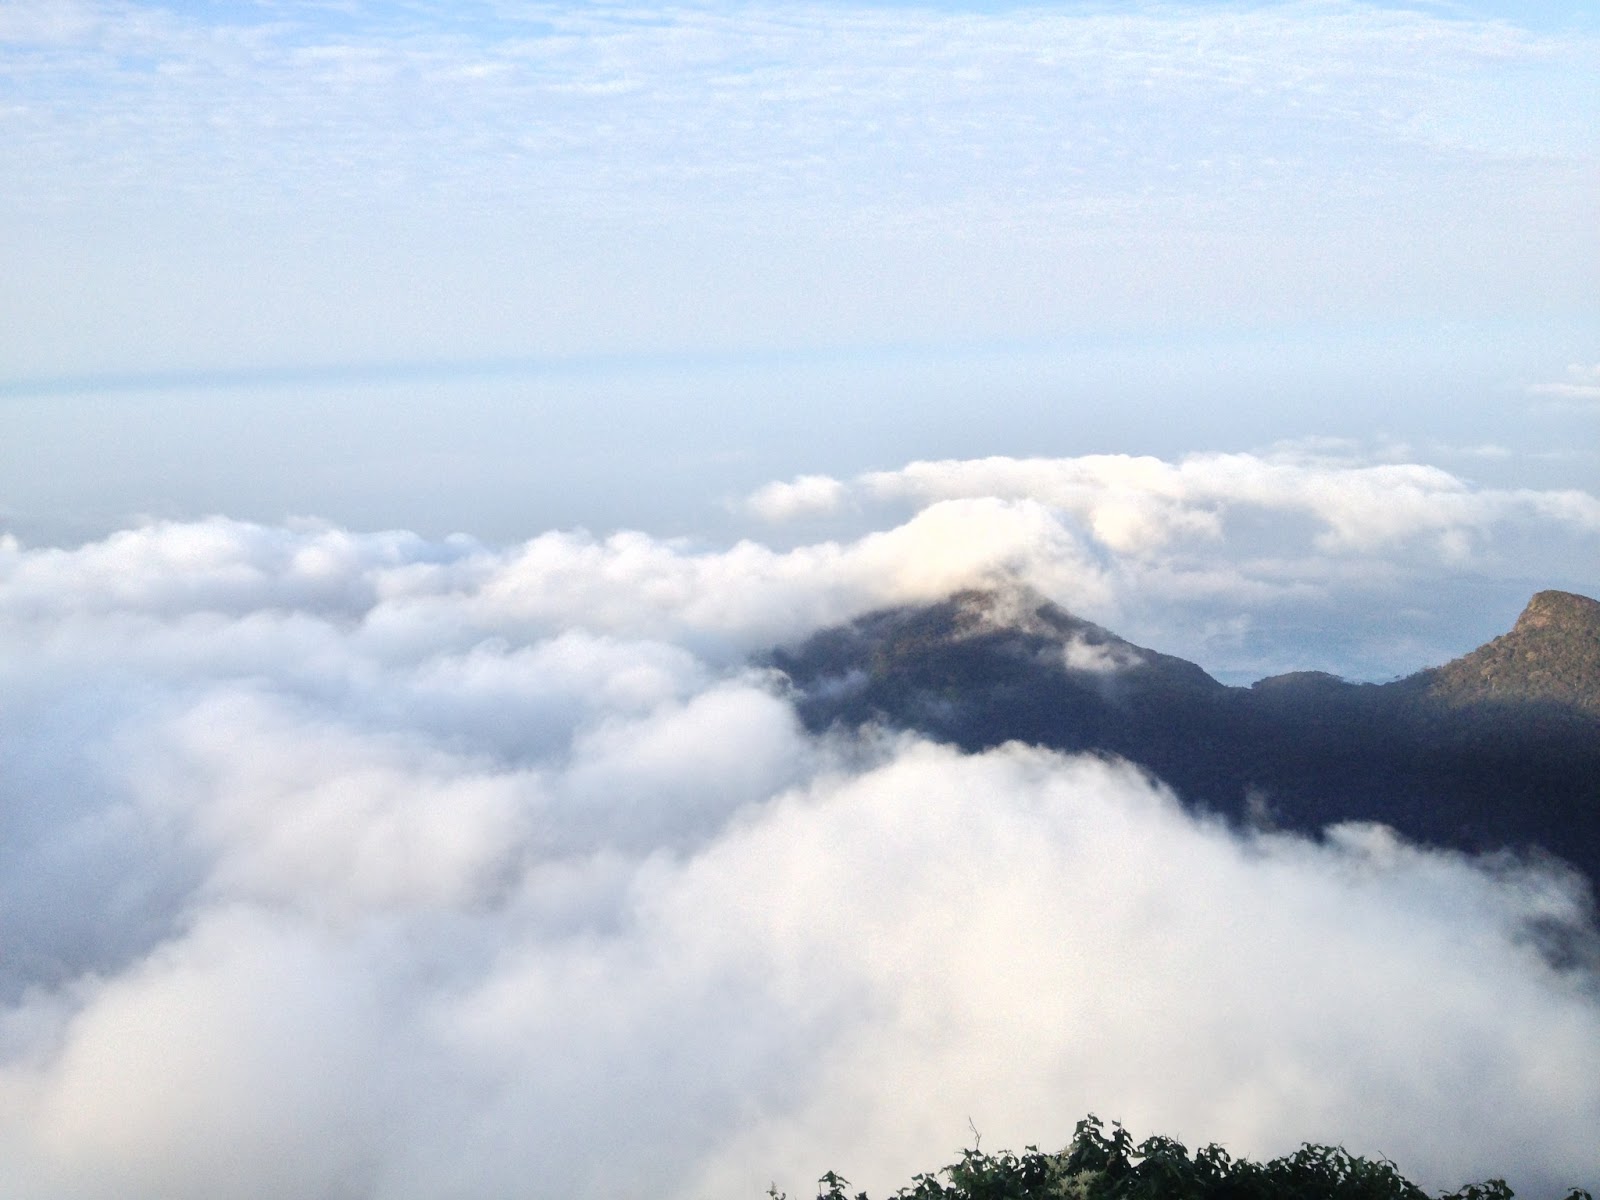 The Americans WILL come: Śrī Pada or Adam's Peak, Most Sacred Mountain